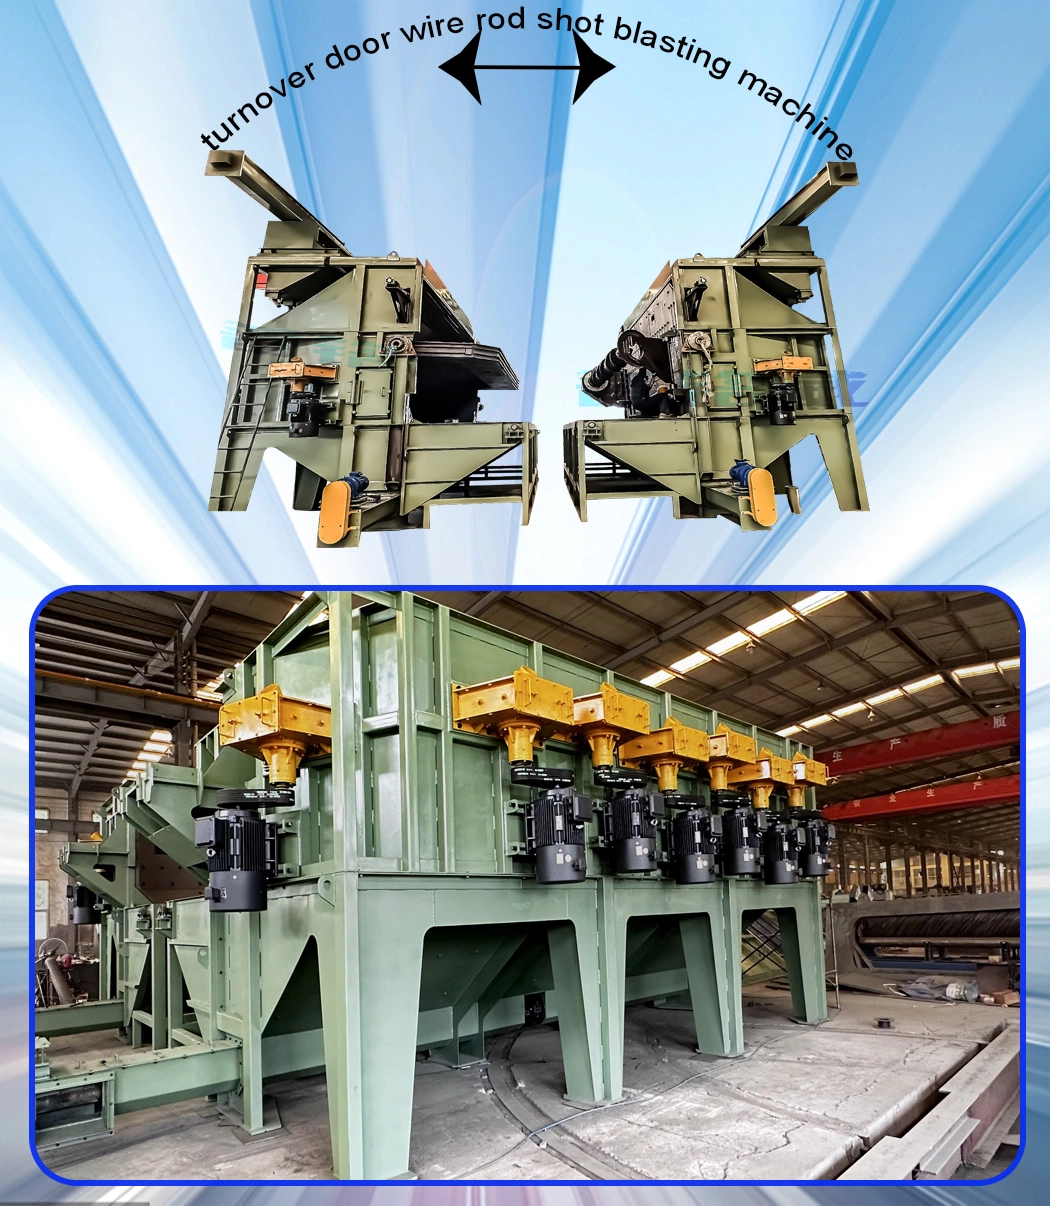 China Wire Coil Rod Shot Blasting Machine Used on Cold Forging Steel